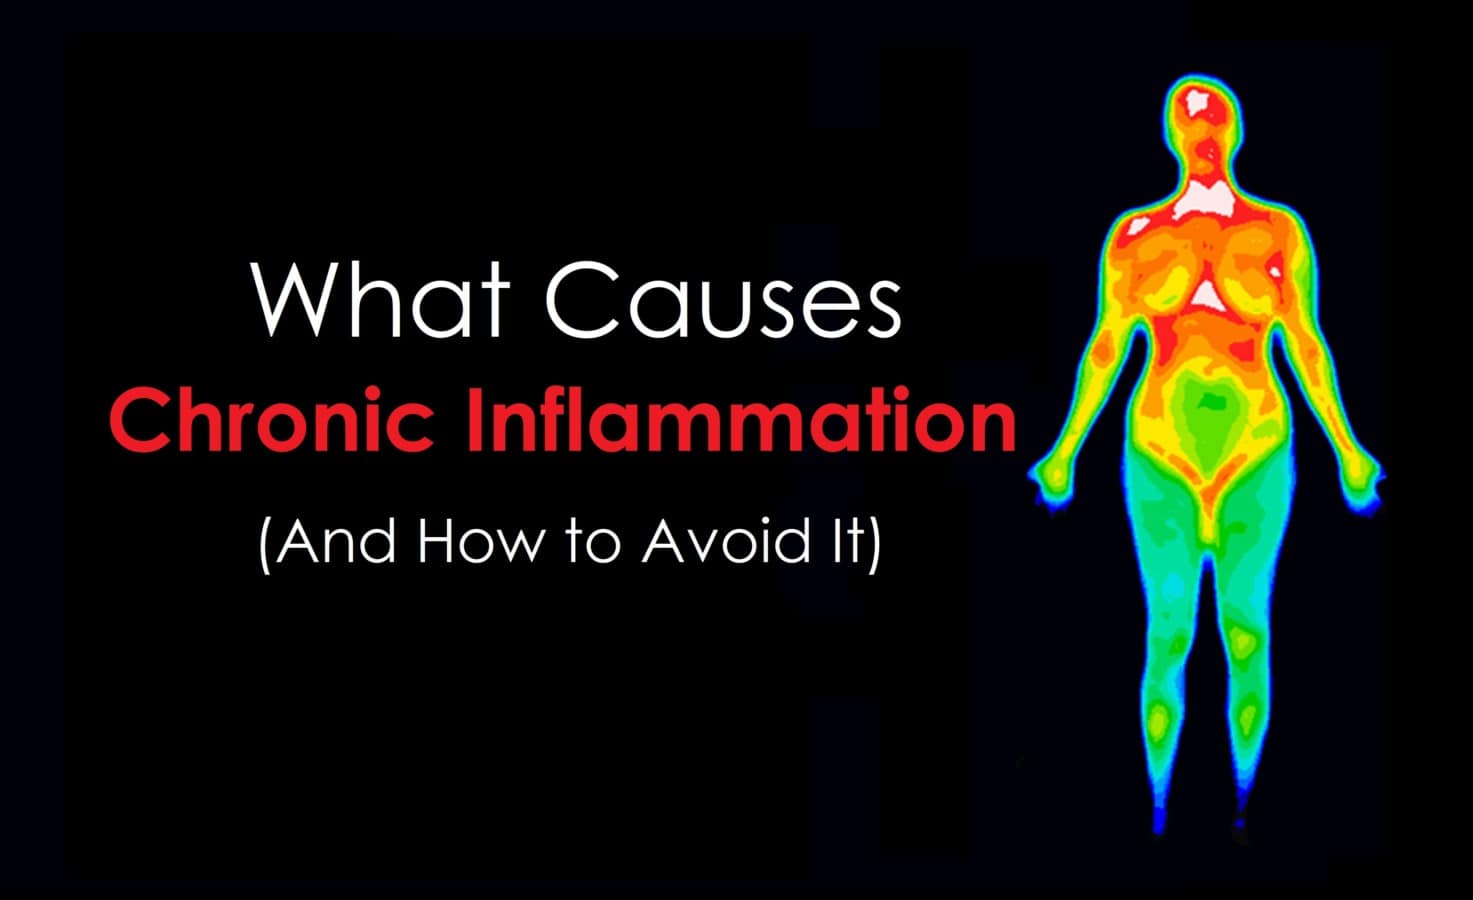 What Causes Chronic Inflammation (And How to Avoid It)